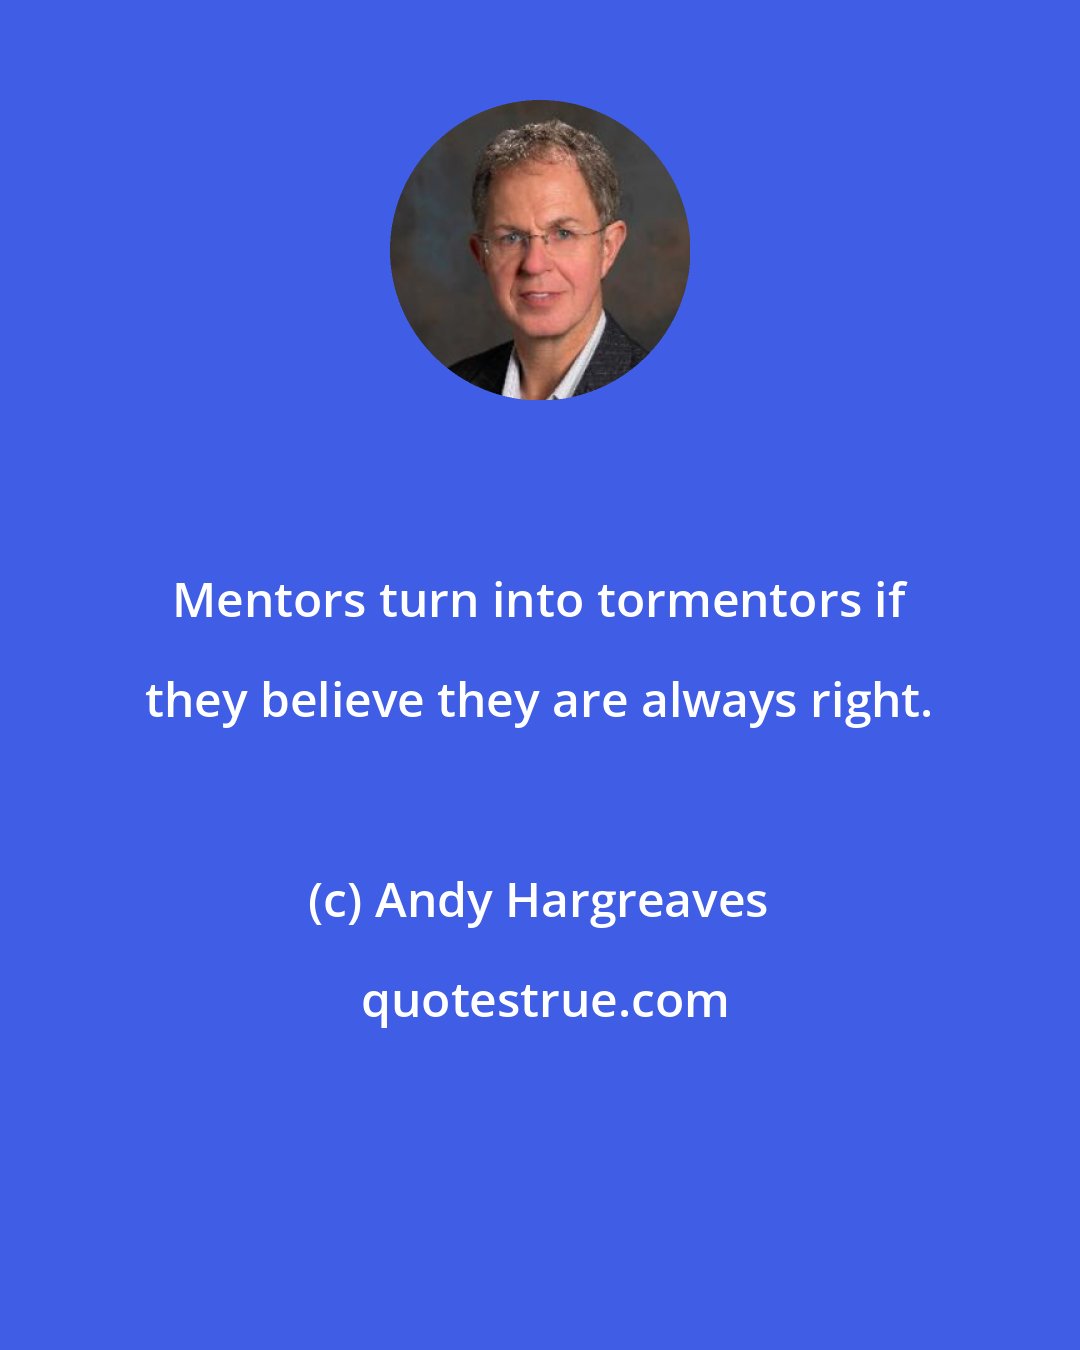 Andy Hargreaves: Mentors turn into tormentors if they believe they are always right.